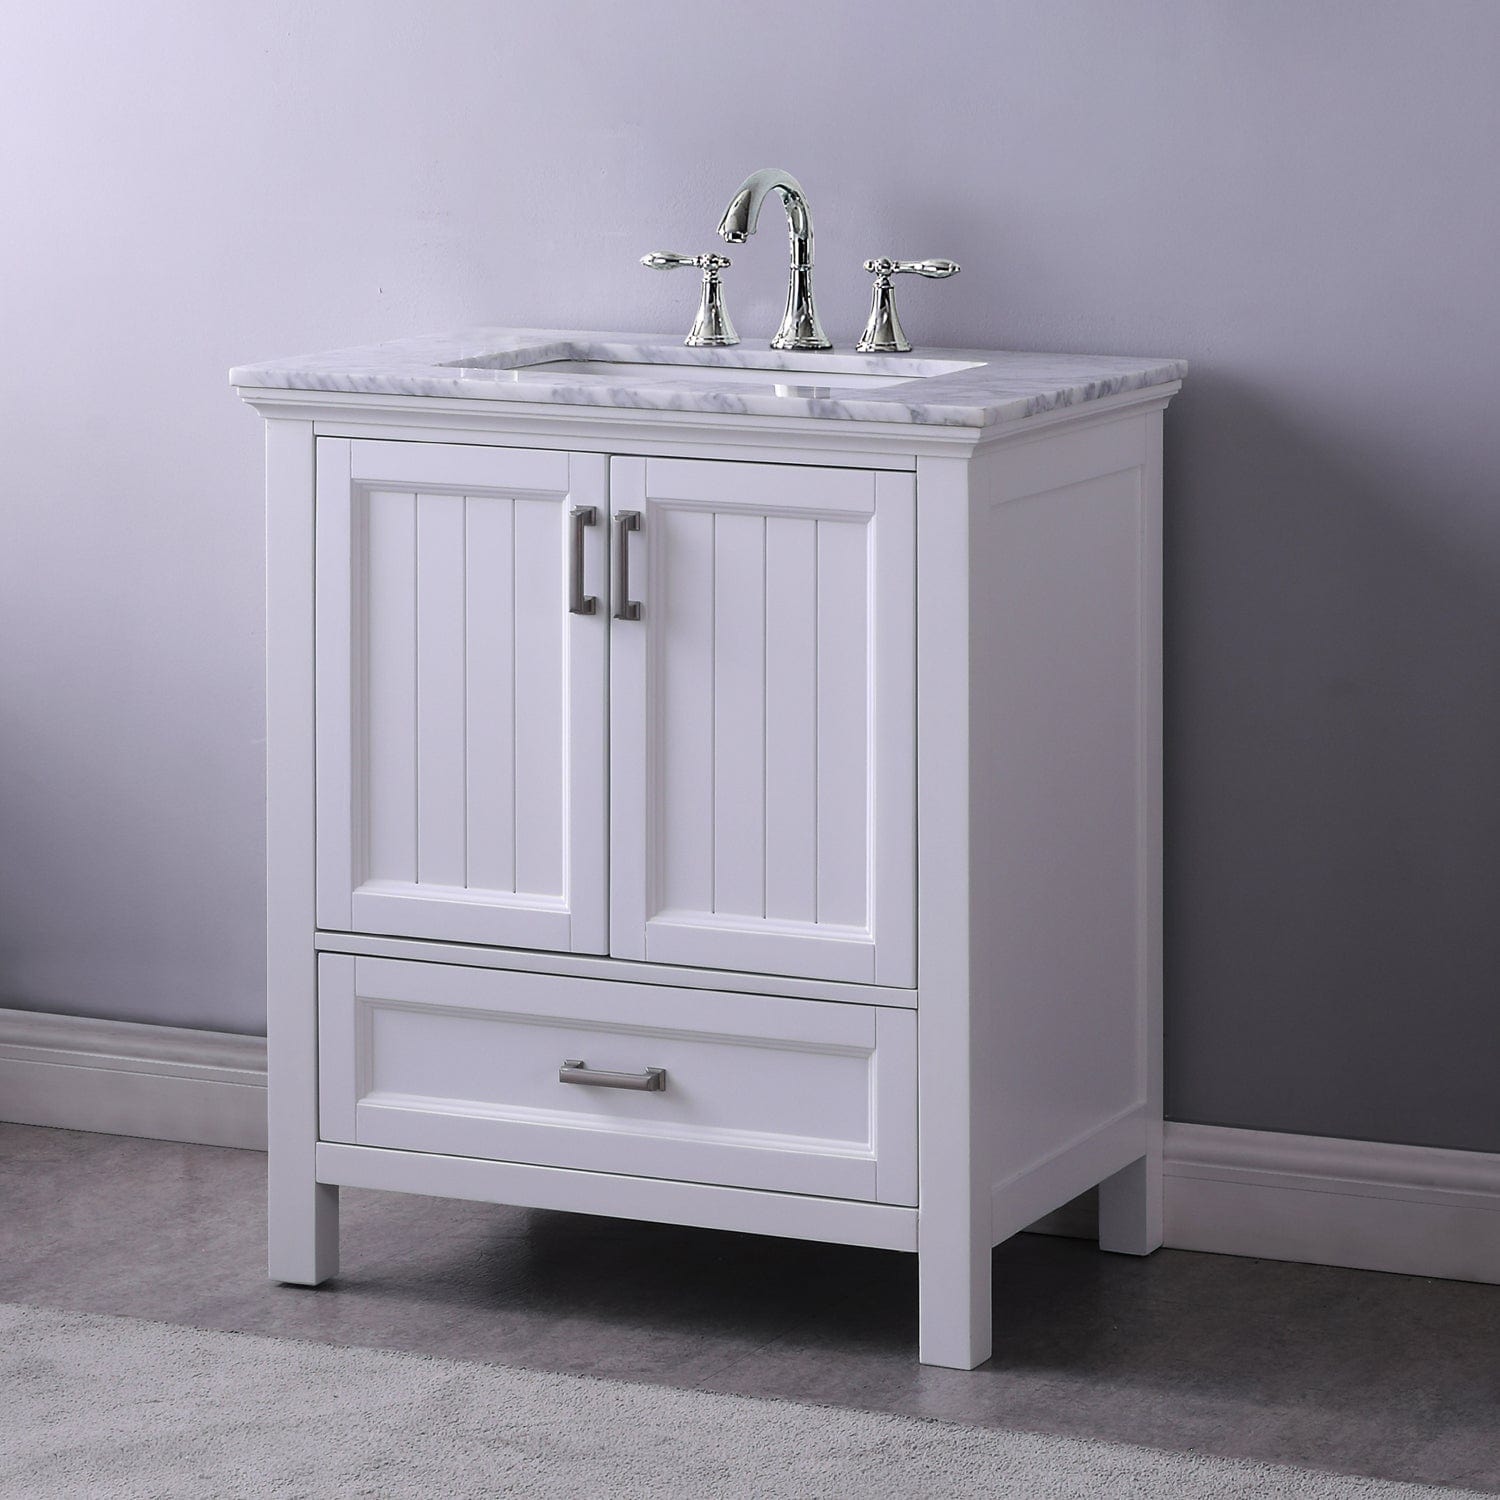 Altair Isla 30" Single Bathroom Vanity Set in White and Carrara White Marble Countertop without Mirror 538030-WH-CA-NM - Molaix631112970761Vanity538030-WH-CA-NM